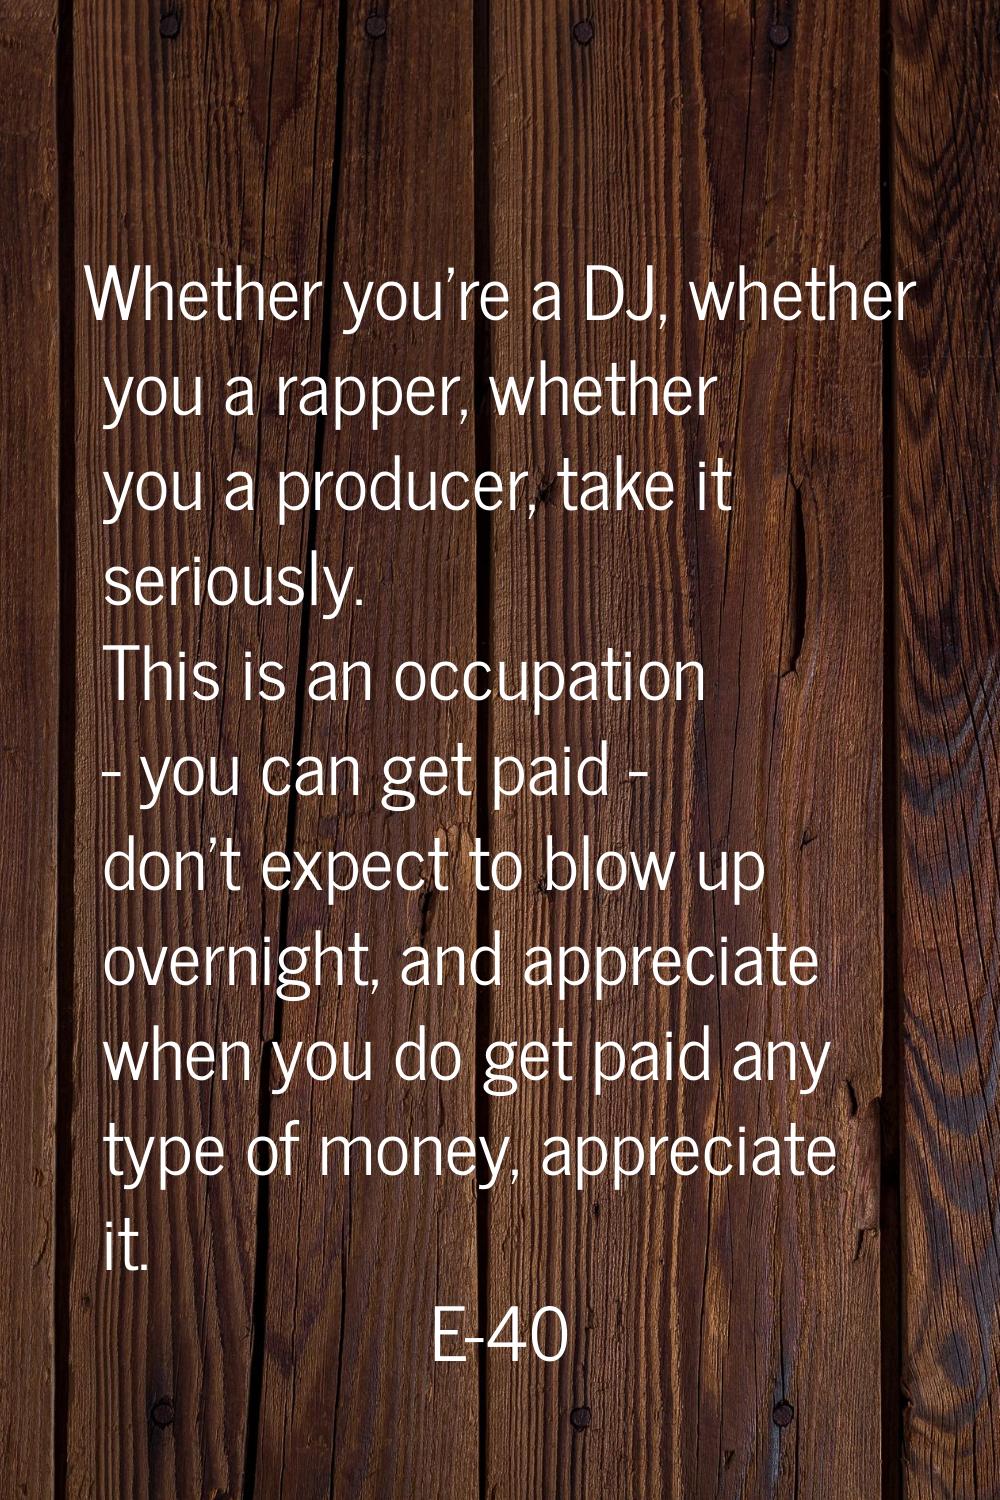 Whether you're a DJ, whether you a rapper, whether you a producer, take it seriously. This is an oc